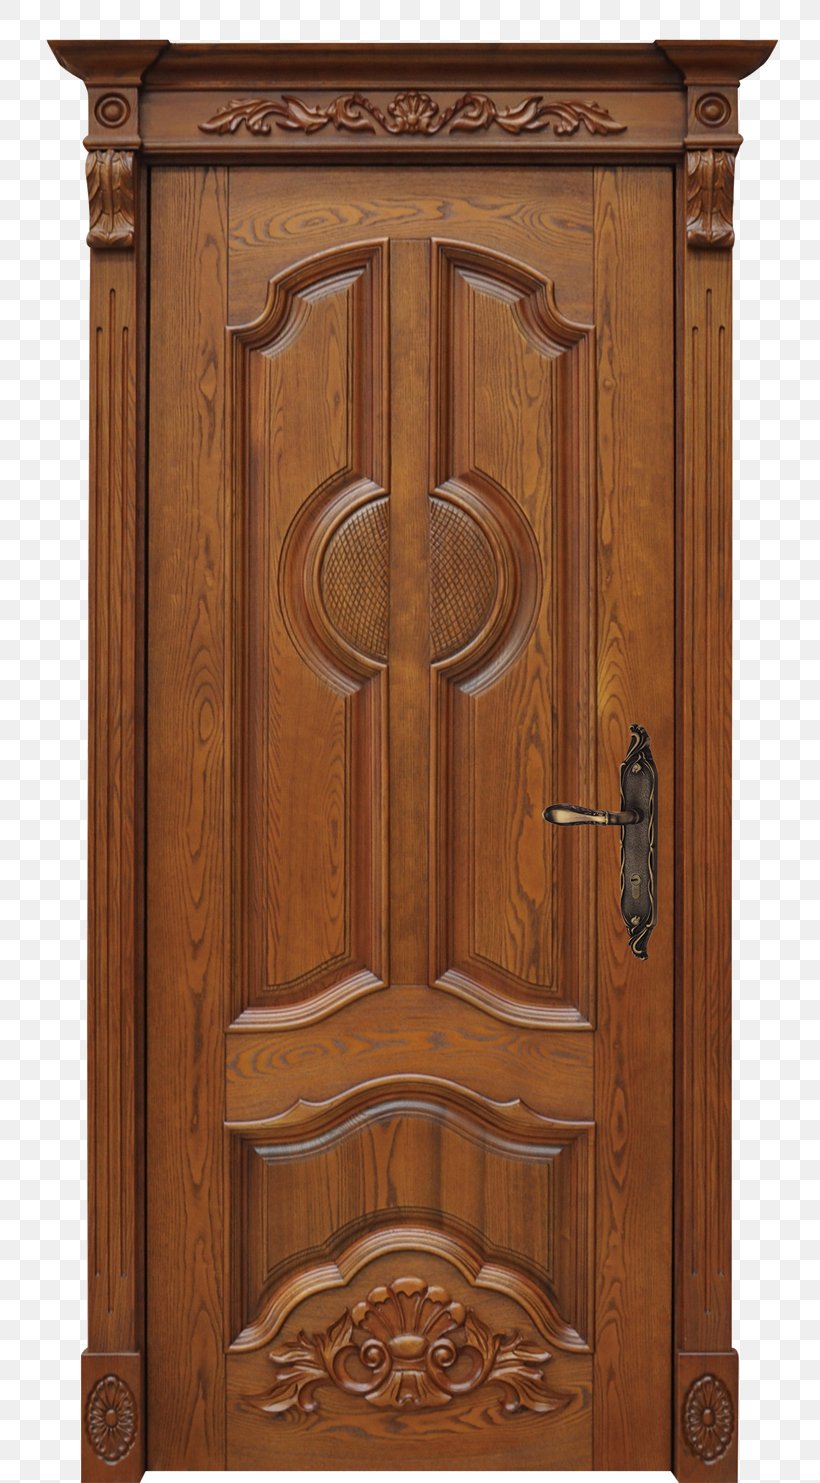 Door Cupboard Wood Stain Furniture, PNG, 771x1483px, Door, Antique, Armoires Wardrobes, Cabinetry, Carving Download Free